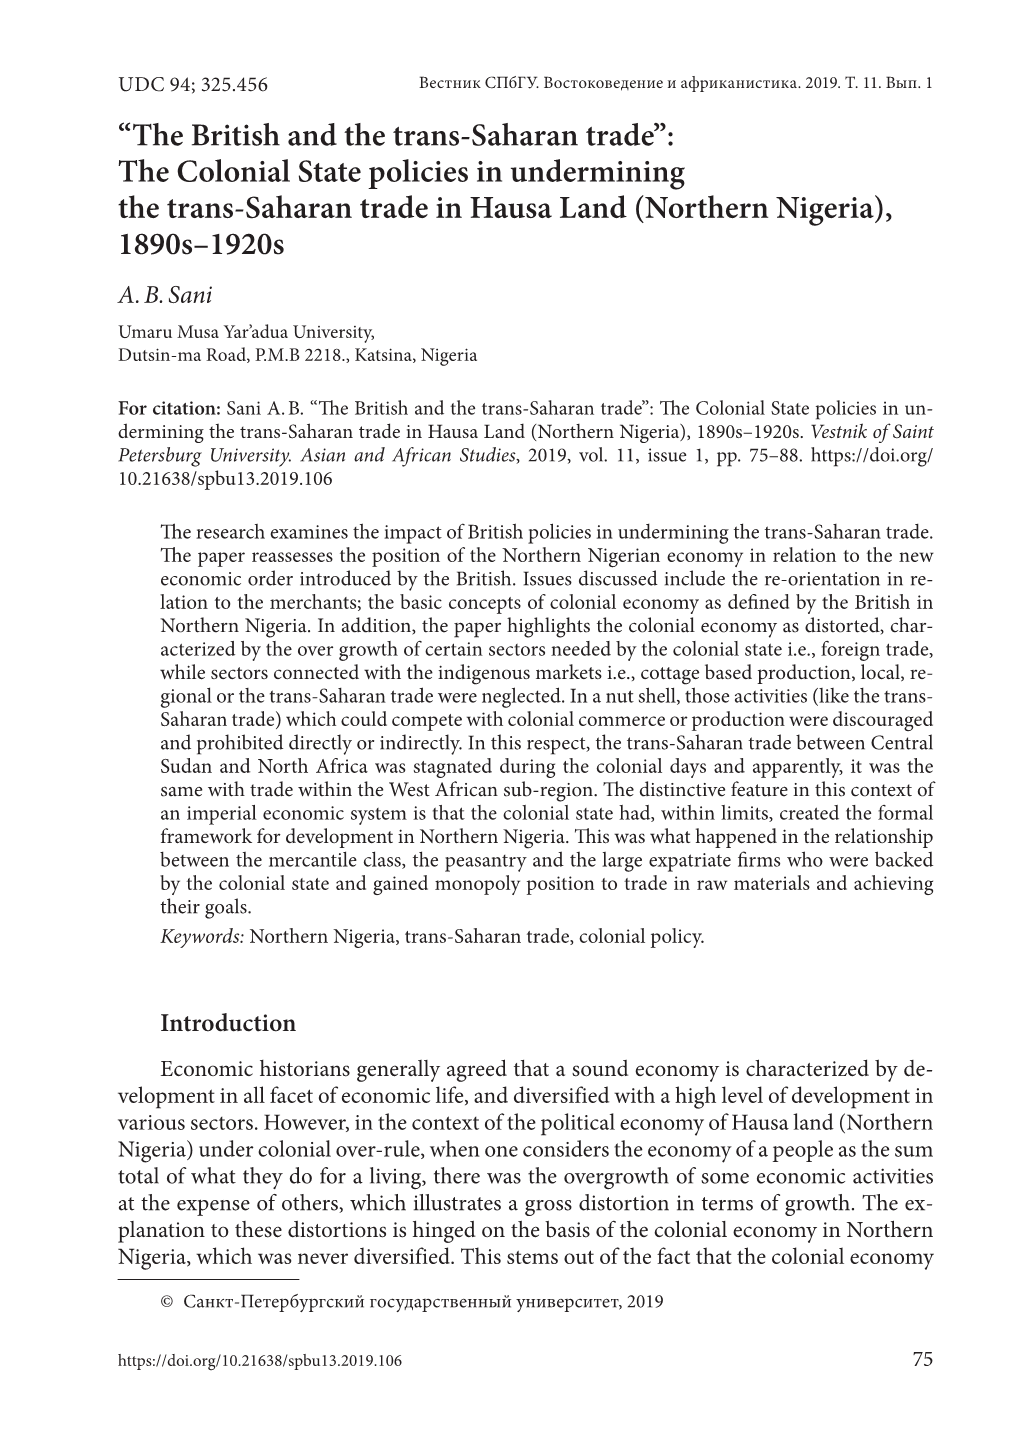 “The British and the Trans-Saharan Trade”: the Colonial State Policies in Undermining the Trans-Saharan Trade in Hausa Land (Northern Nigeria), 1890S–1920S A